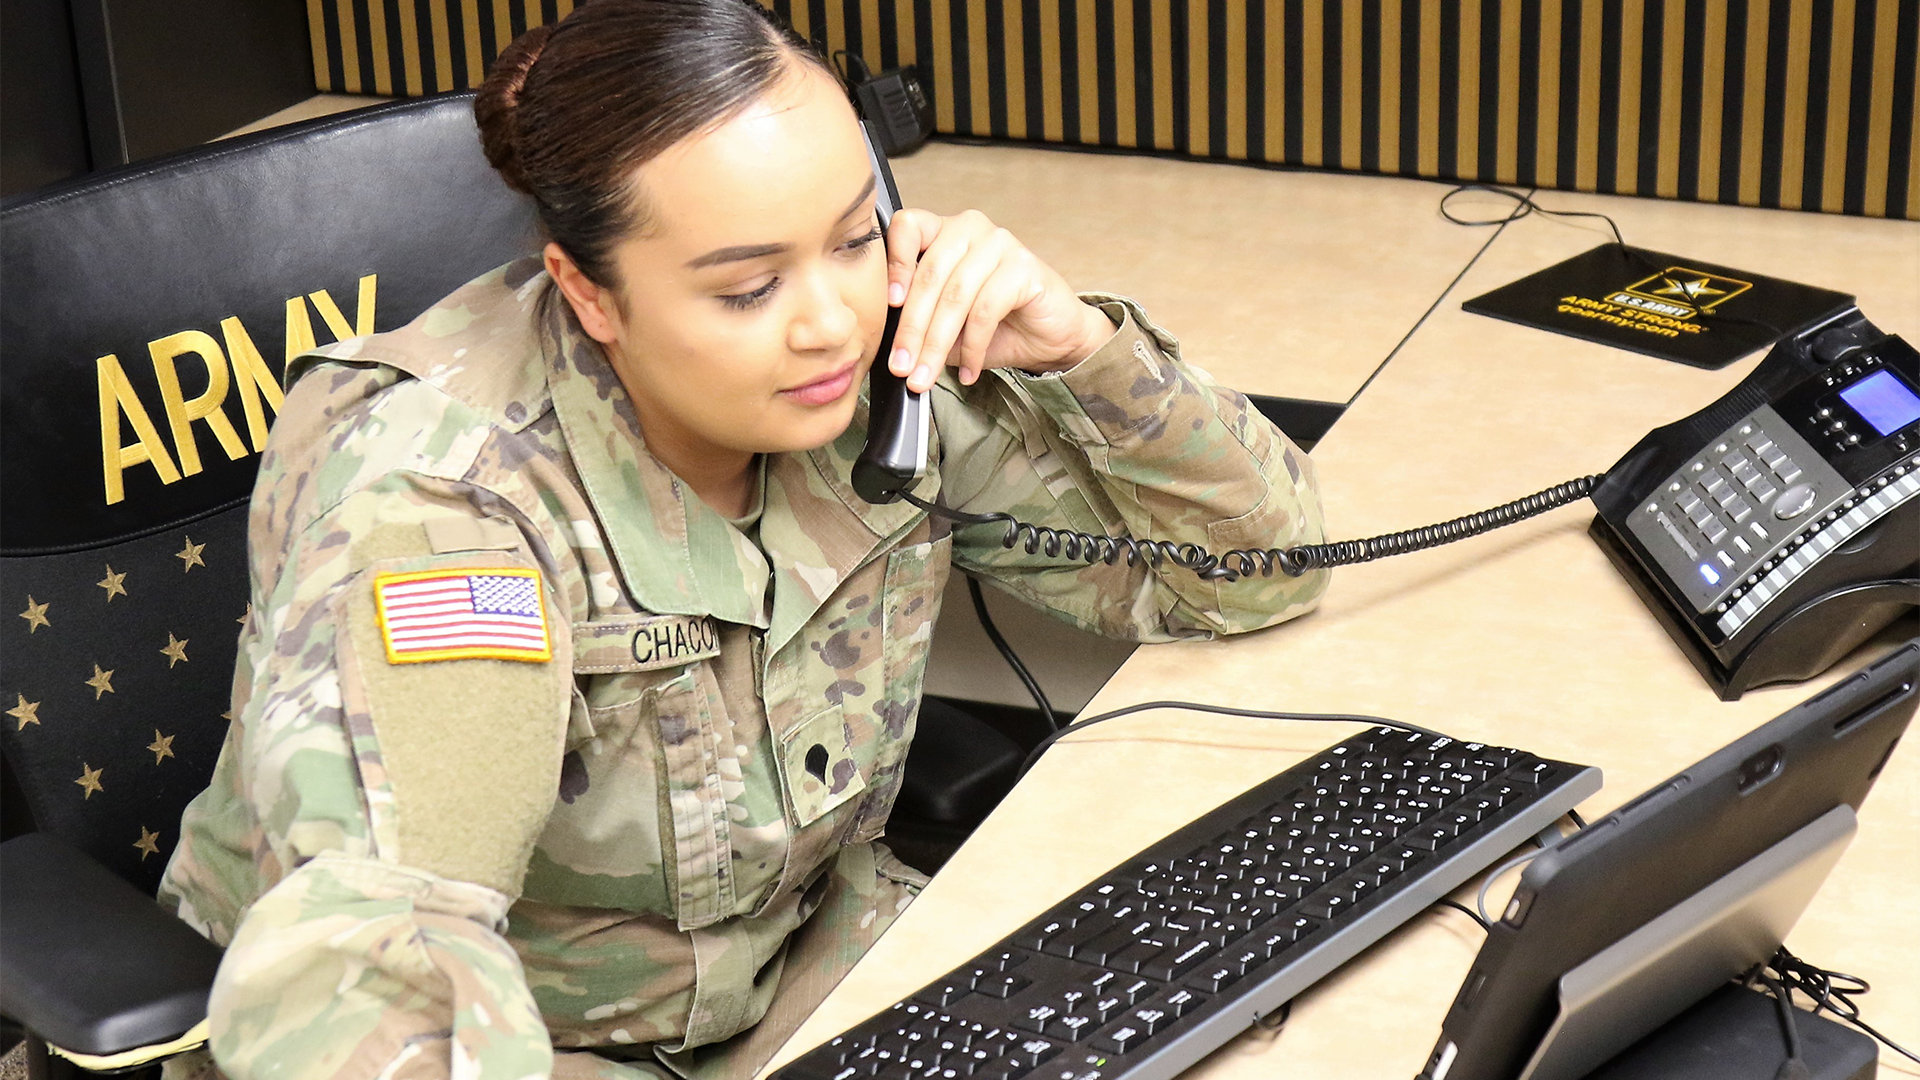 U.S. Army Reserve Spc. Alexis Chacon works as a hometown recruiter at the Zaragoza Recruiting Station, in El Paso, TX, June 11, 2018. (Maj. Brandon R. Mace / U.S. Army Reserve)